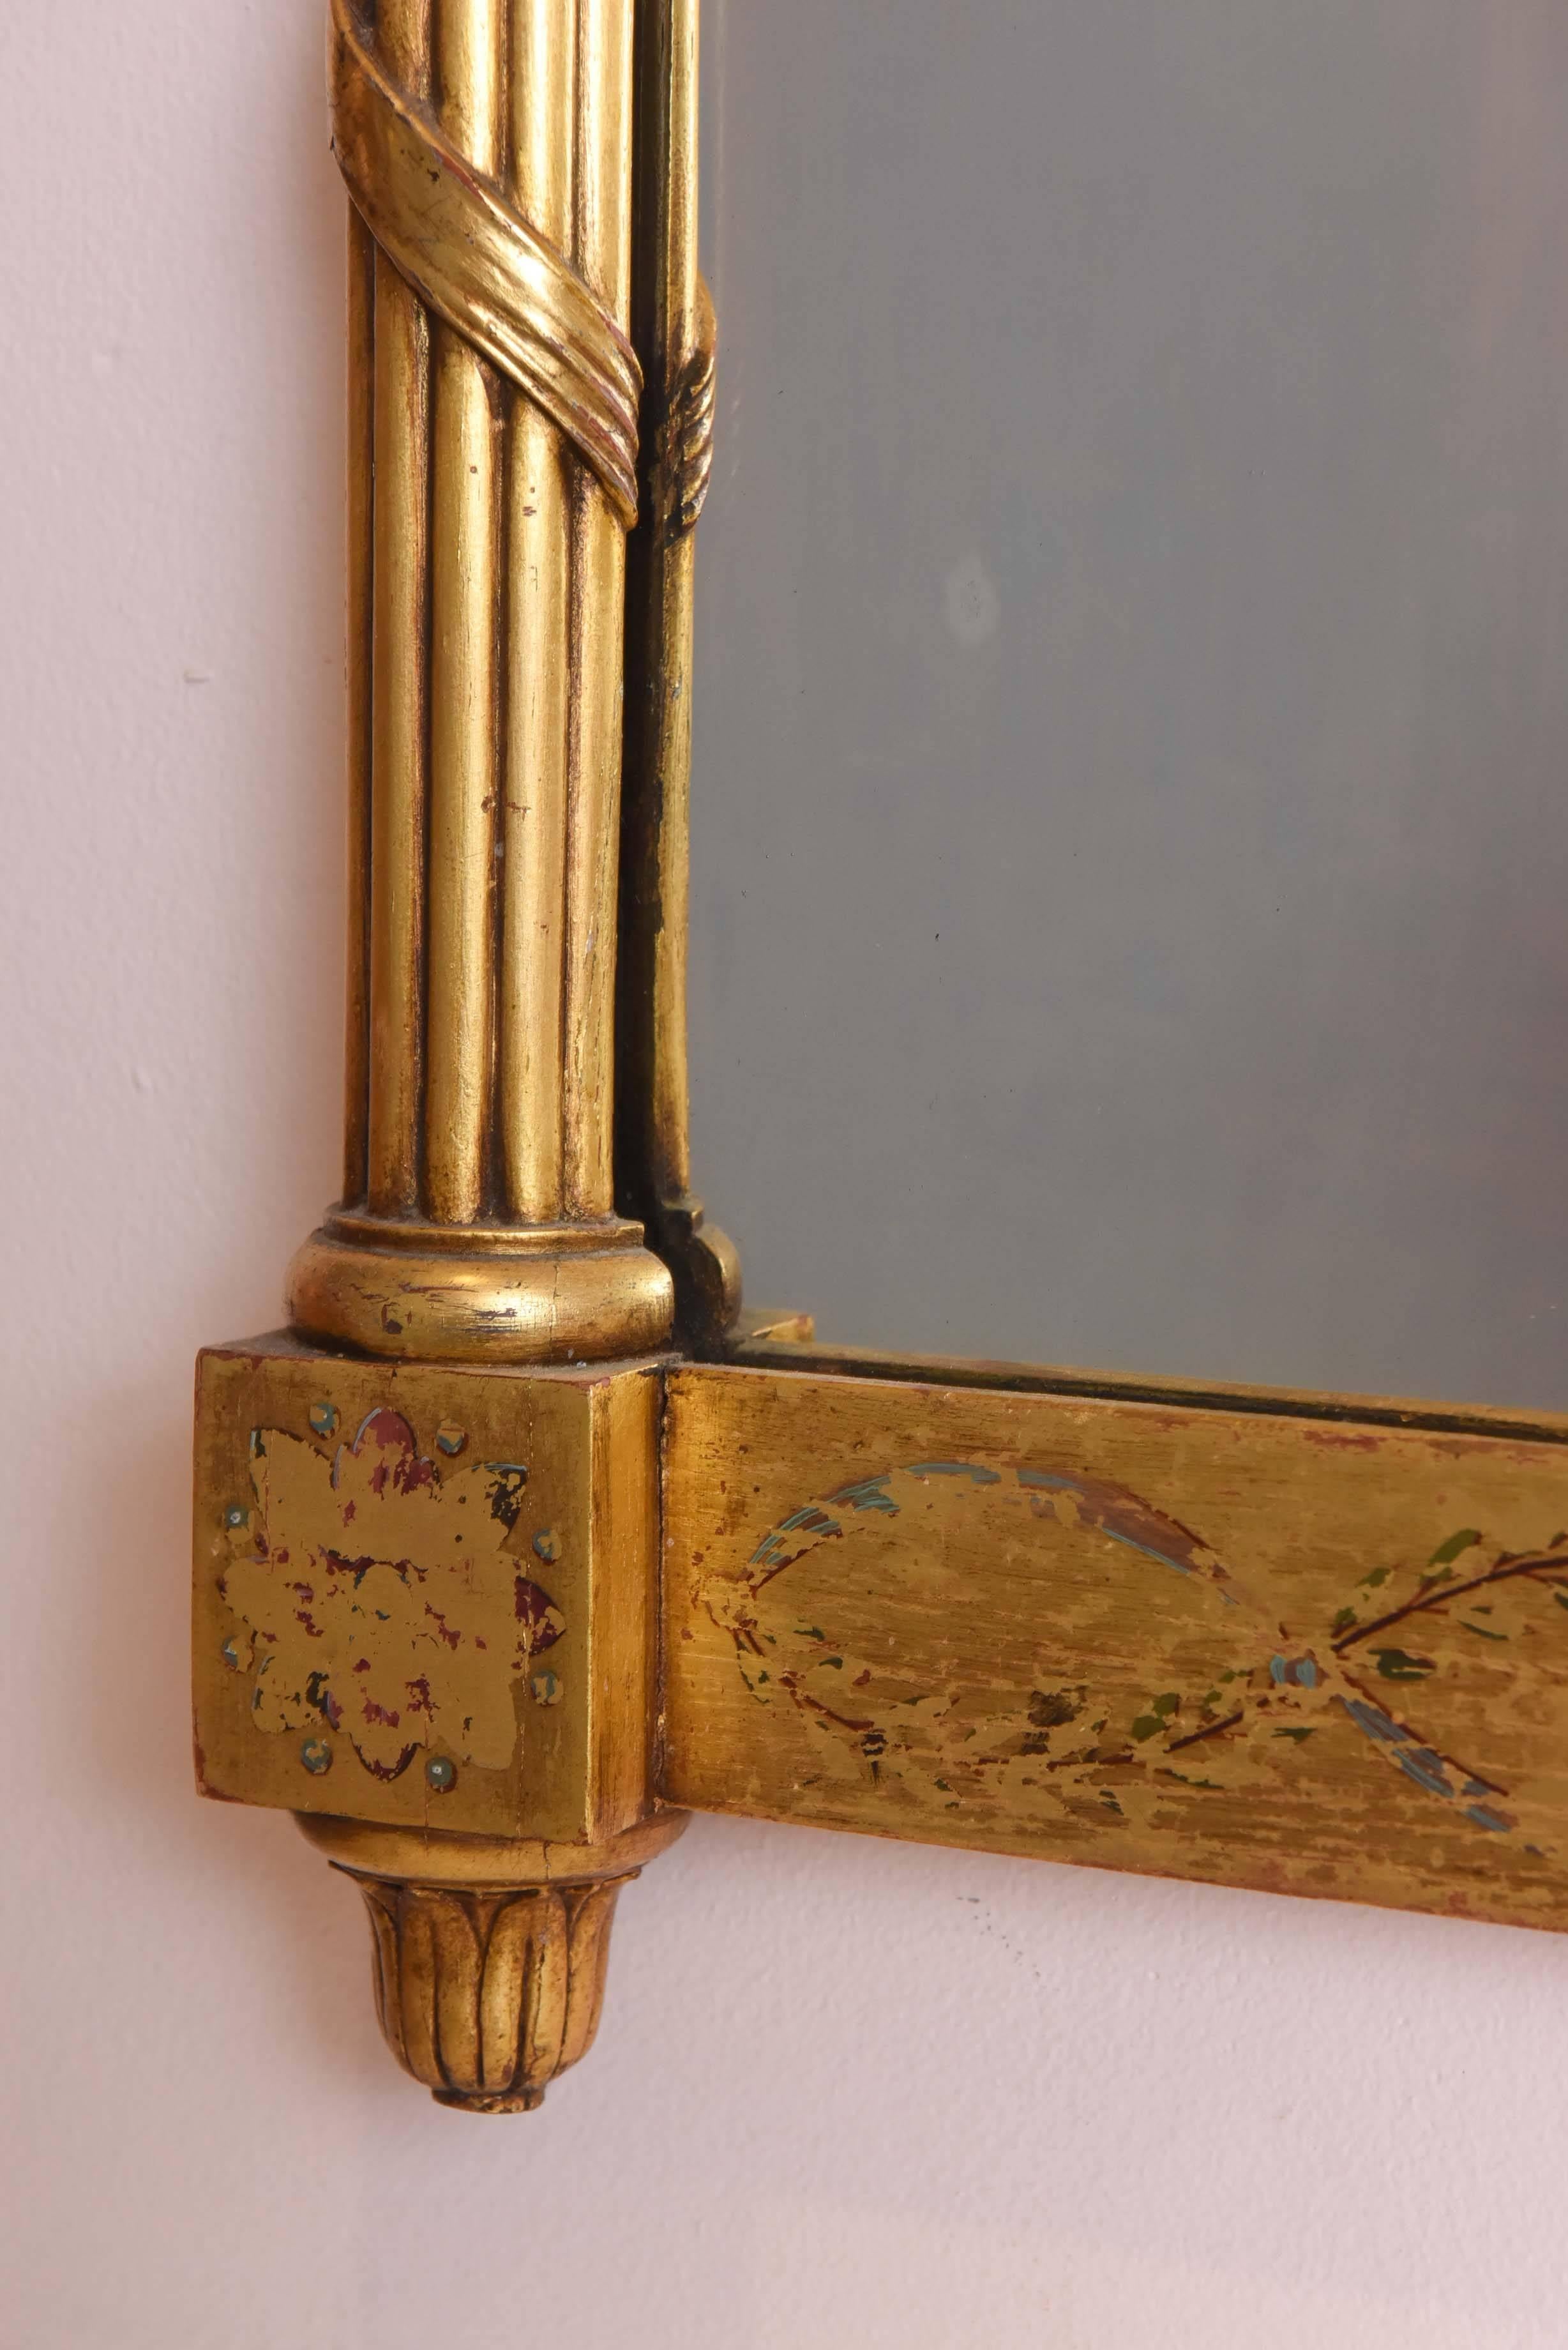 A lovely giltwood mirror with hand-painted floral swag motif and framed by beautiful columns with an urn finial at its top. A very nice size with great detail to the overall carved giltwood frame. Retaining most of its original polychrome painting